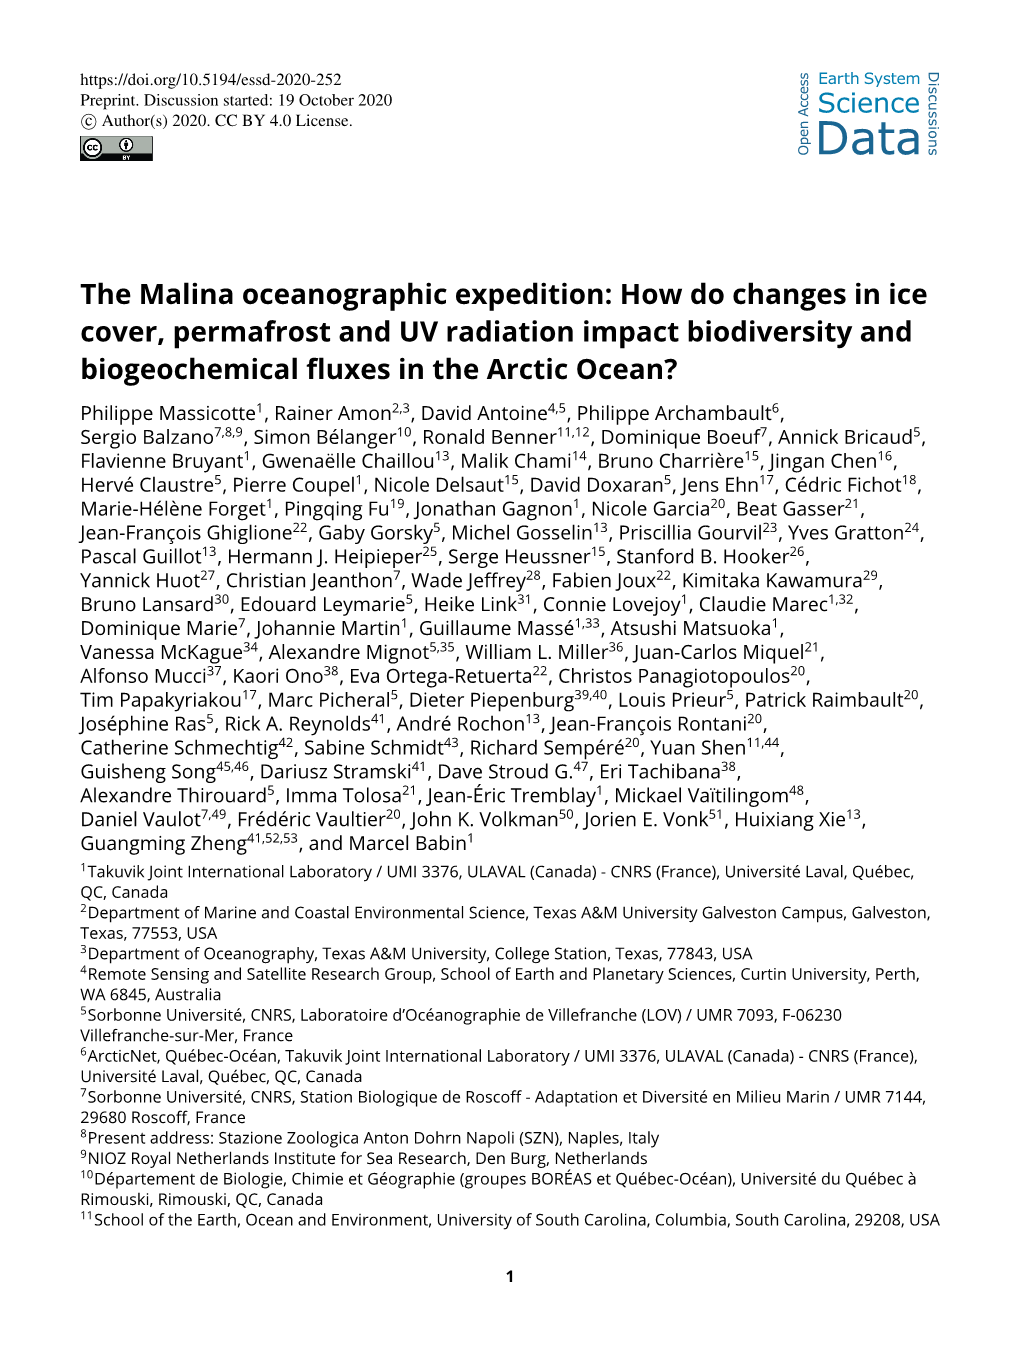 The Malina Oceanographic Expedition: How Do Changes in Ice Cover, Permafrost and UV Radiation Impact Biodiversity and Biogeochemical ﬂuxes in the Arctic Ocean?